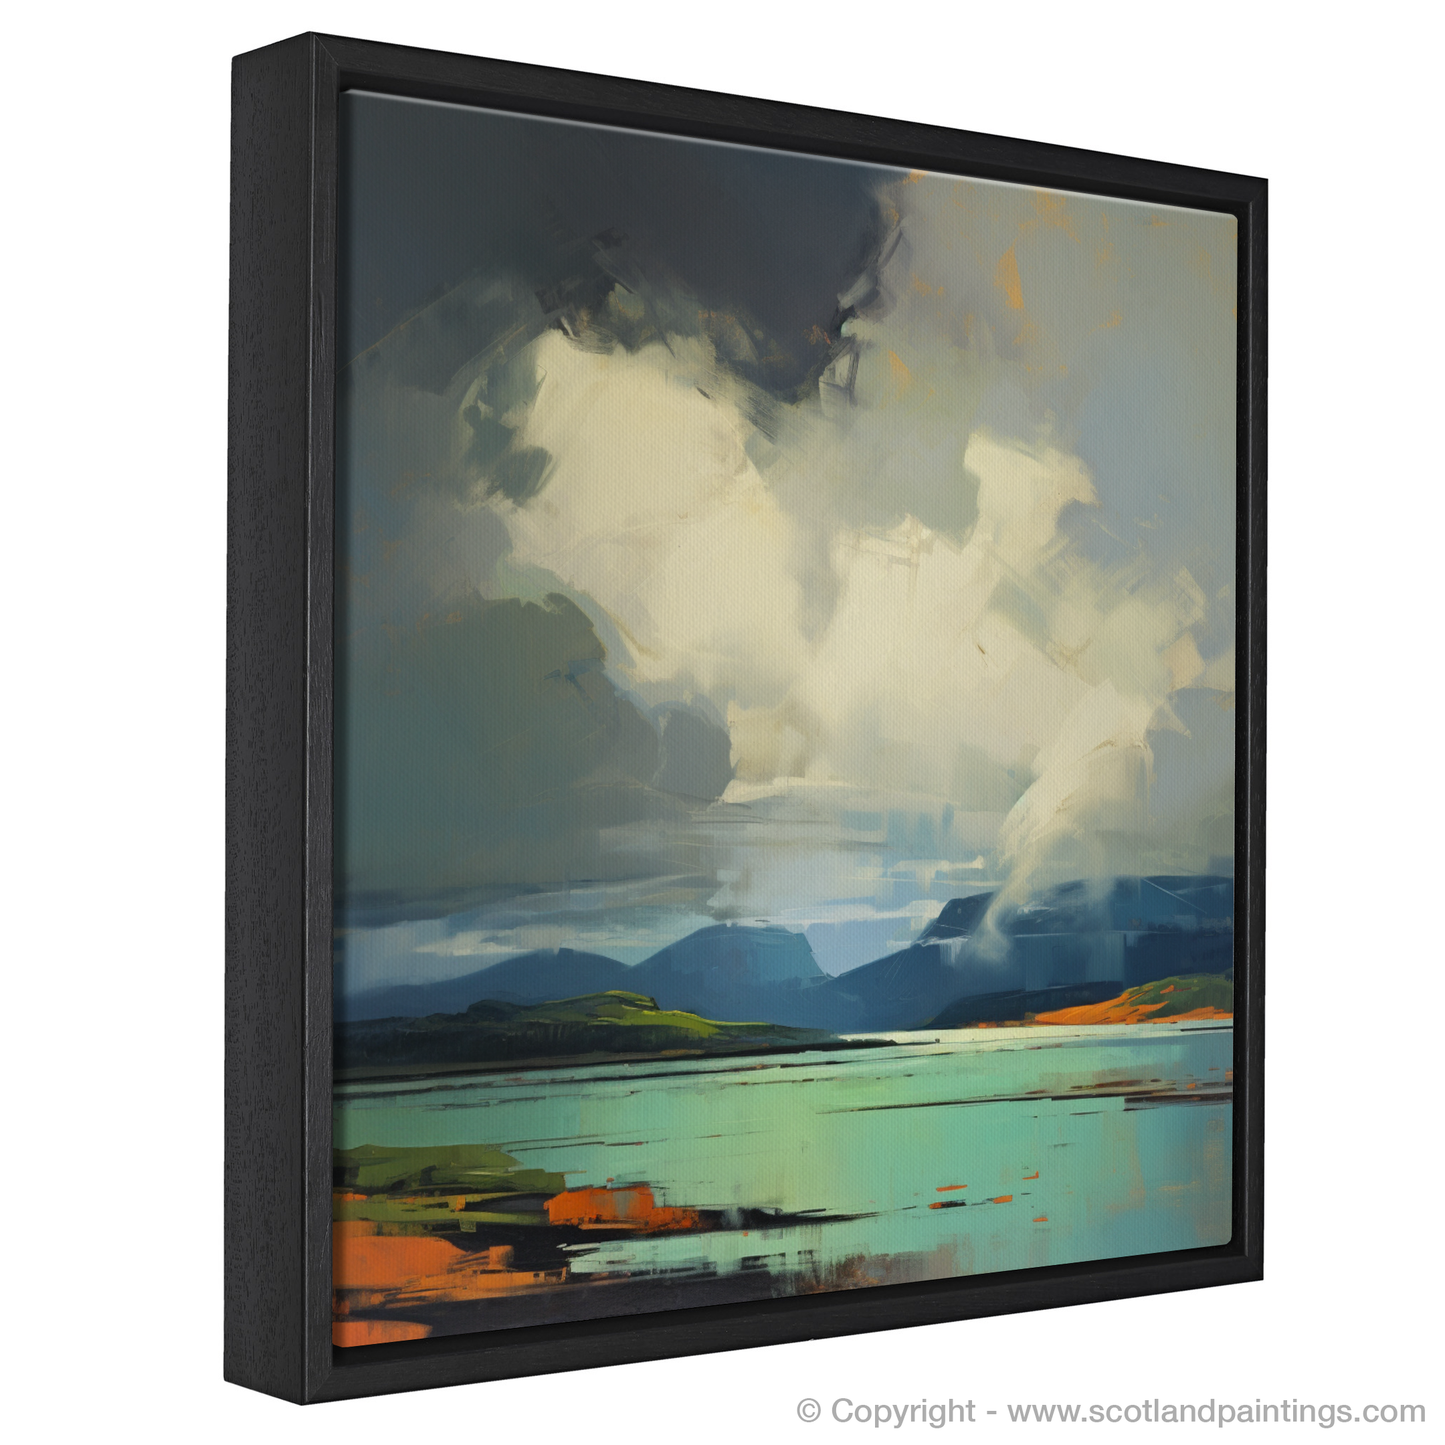 Painting and Art Print of Storm clouds above Loch Lomond entitled "Storm Over Loch Lomond: A Symphony of Light and Shadow".